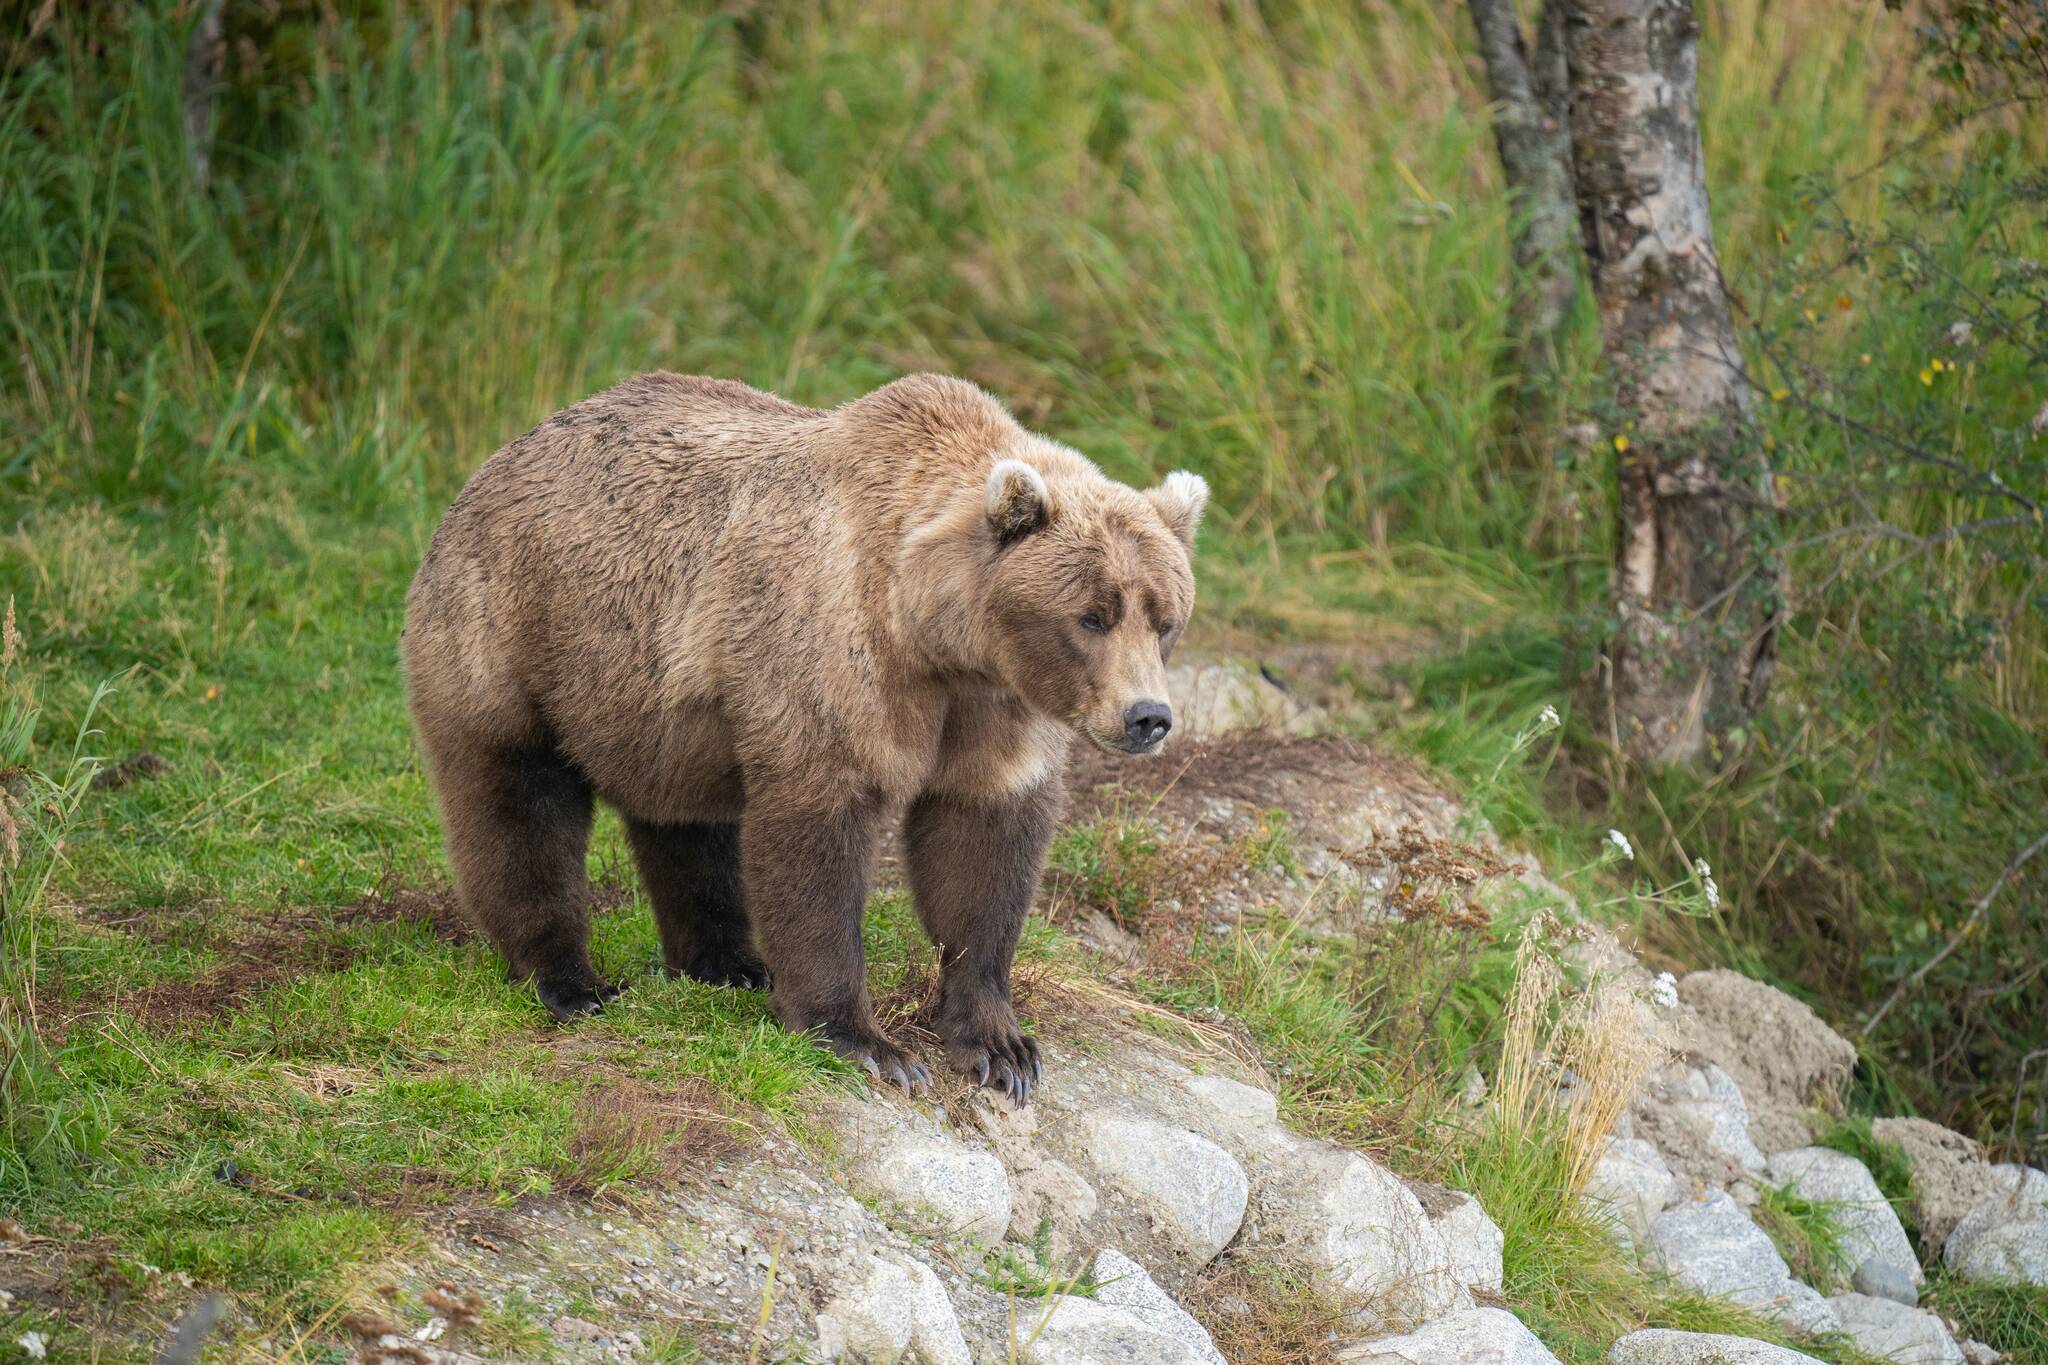 Bear 901, a first-time mother, stands in Katmai National Park, Alaska. She’ll find herself in competition with Bear 402 in Fat Bear Week voting on Tuesday. (Photo courtesy K. Moore/National Park Service)